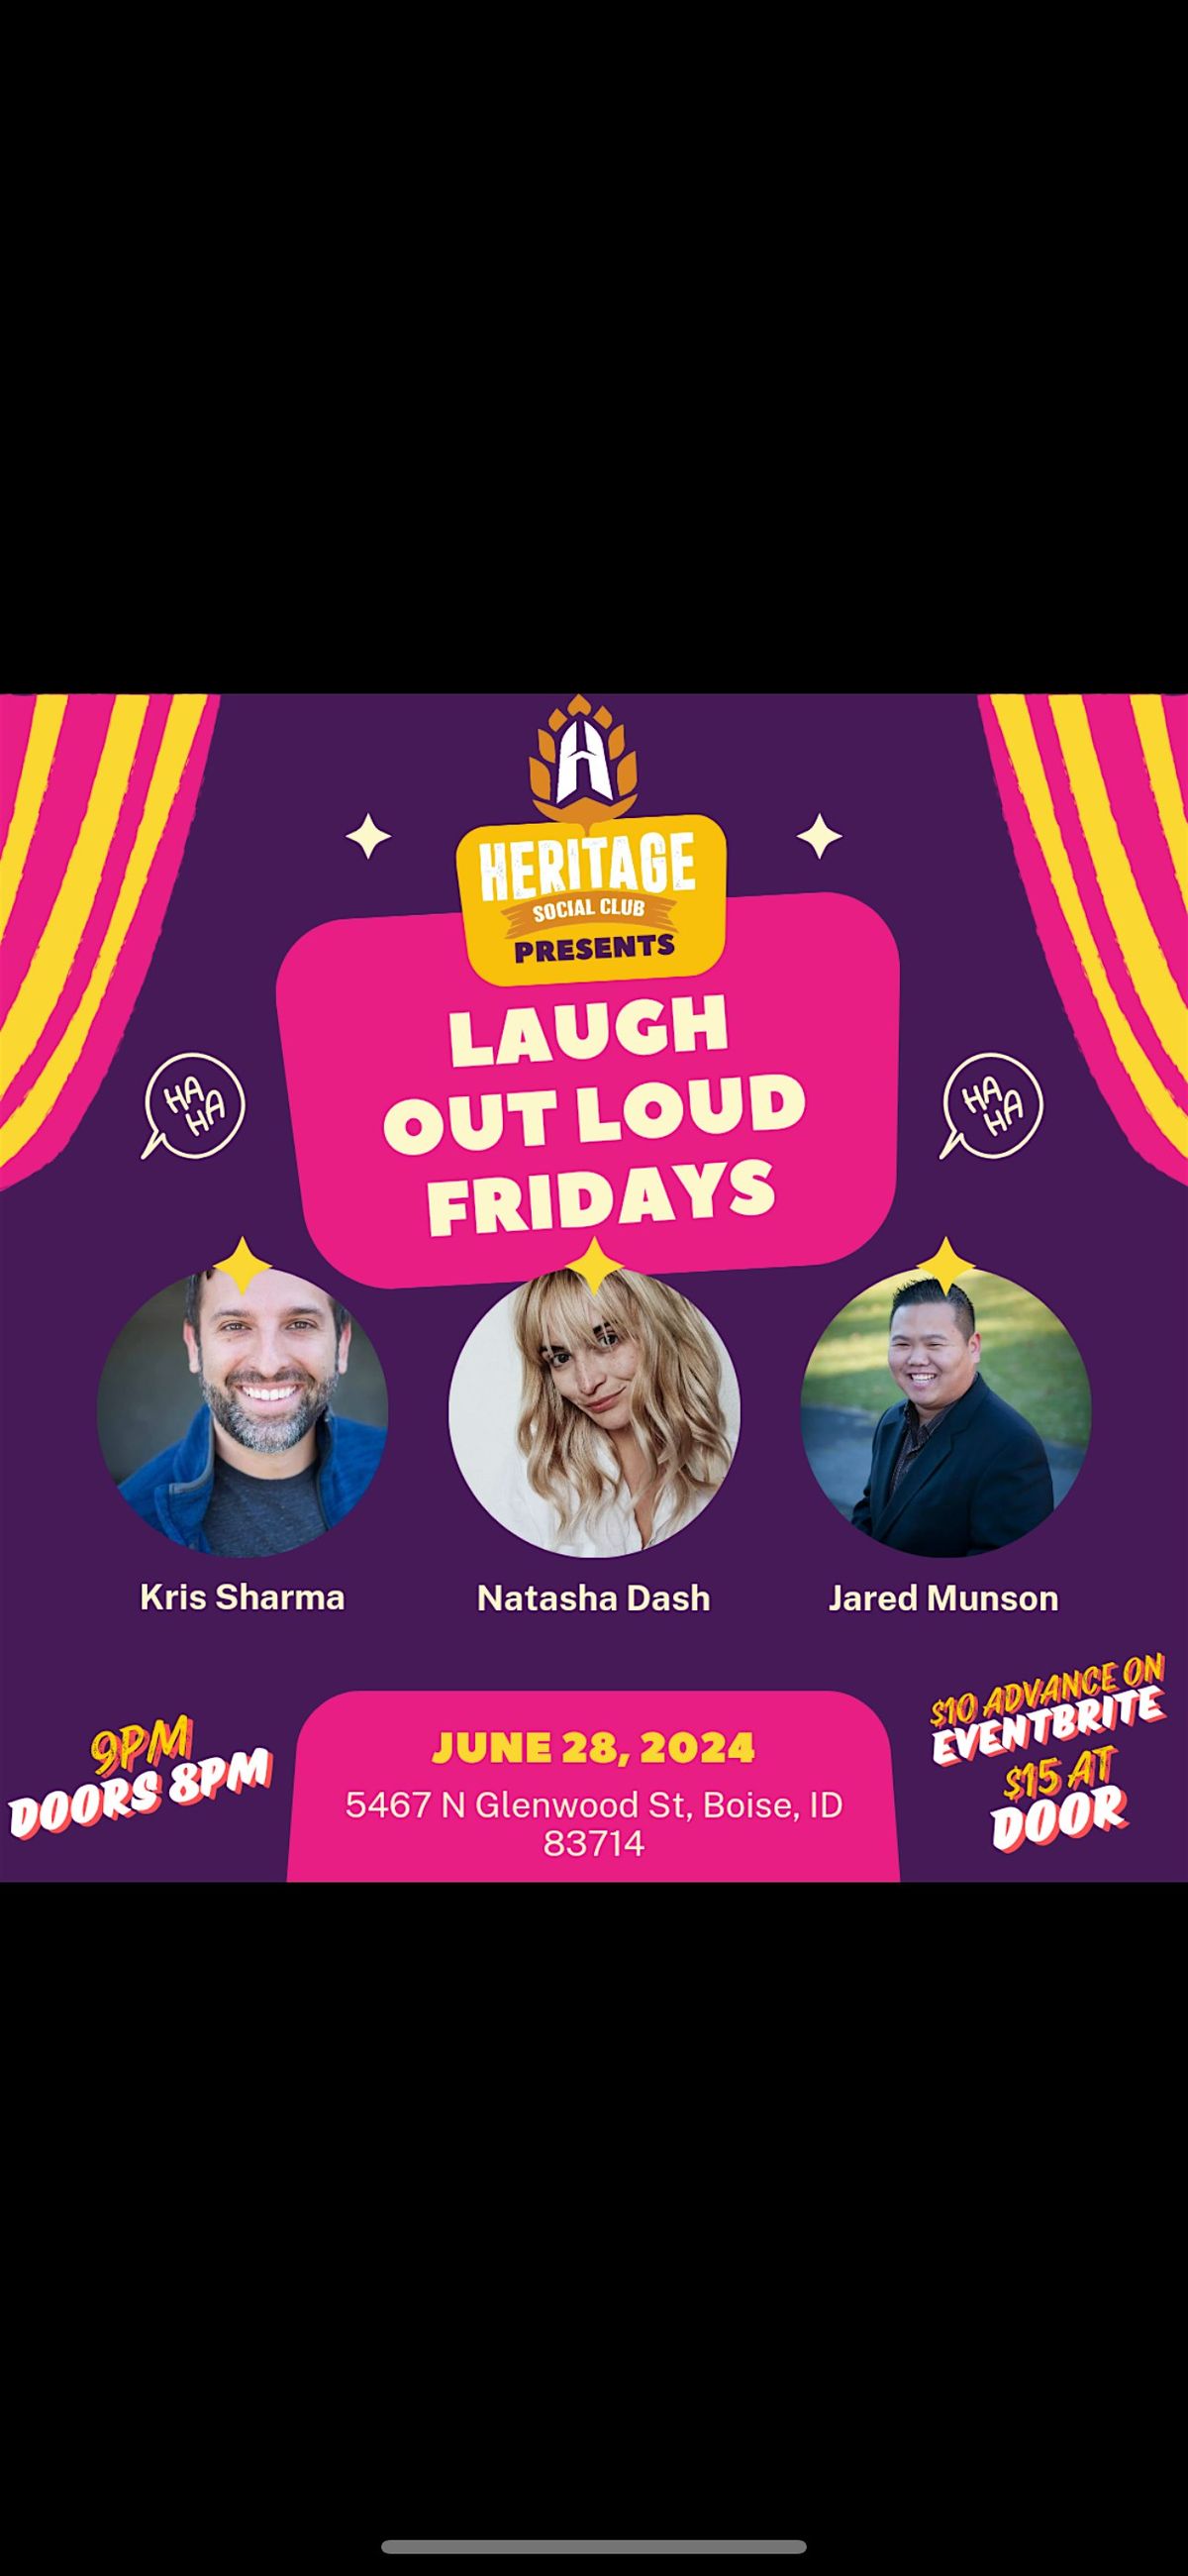 Heritage Social Club Presents Laugh out Loud Fridays